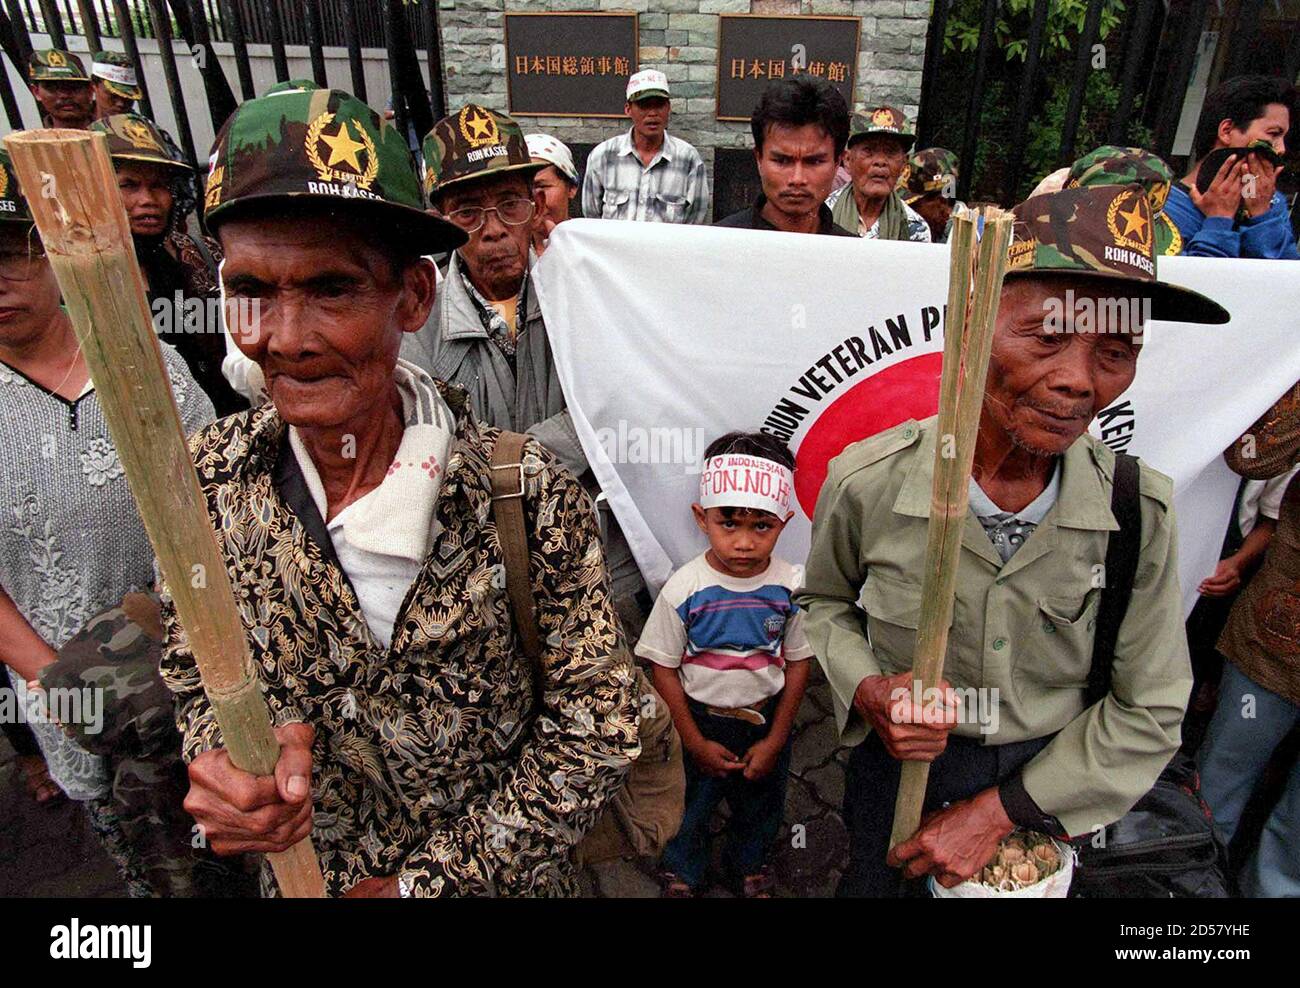 Former Indonesian Forced Labourers And Military Recruits Protest Outside The Japanese Embassy In Jakarta January 26 More Than One Hundred Assembled Outside The Embassy Demanding Compensation For Their Services When Japan Occupied